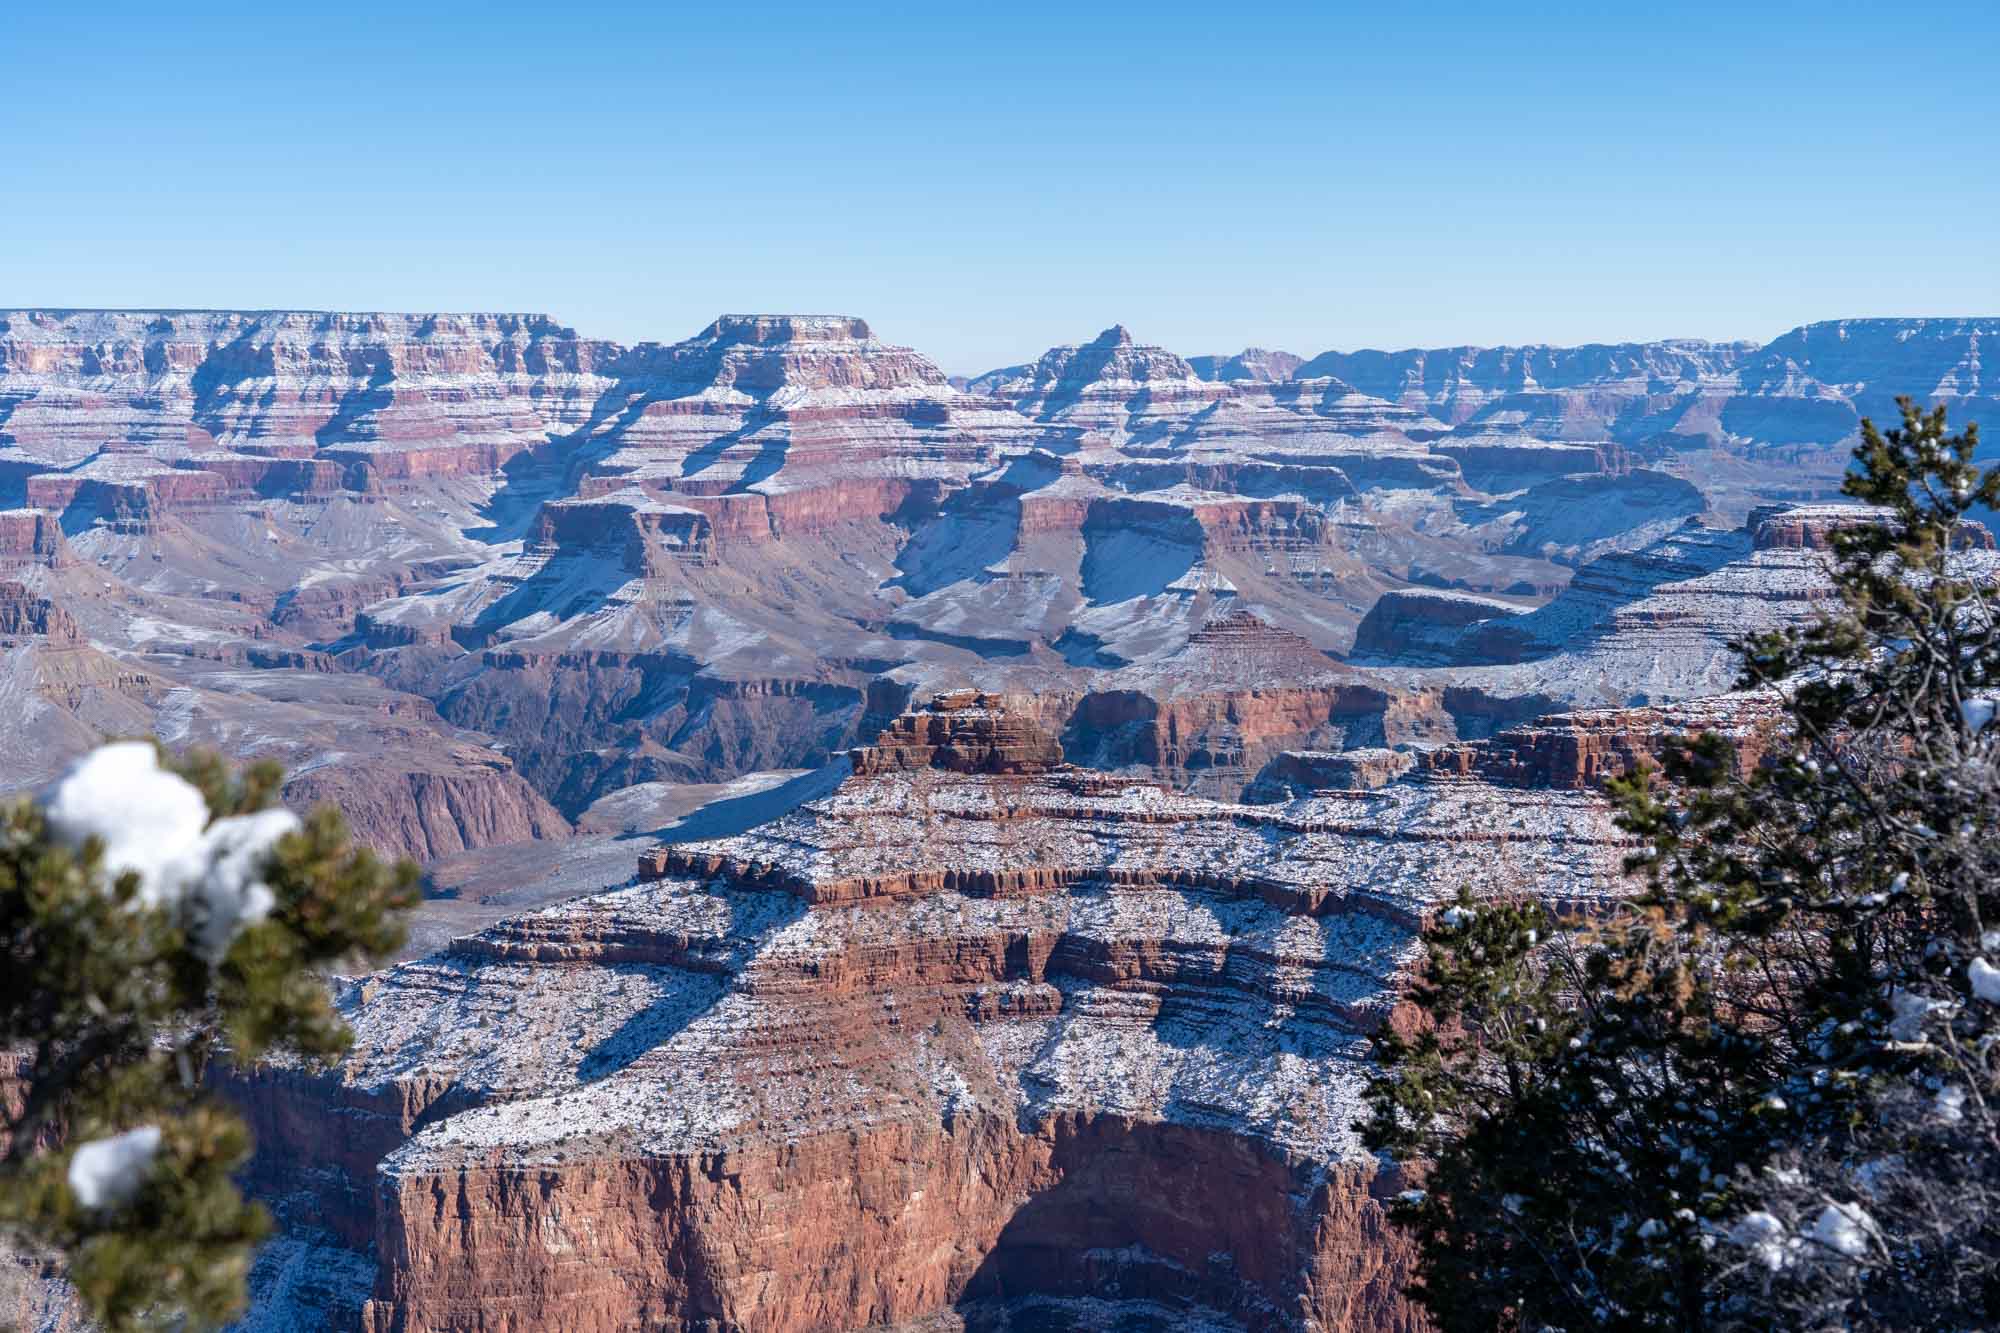 Is it cold in the Grand Canyon?